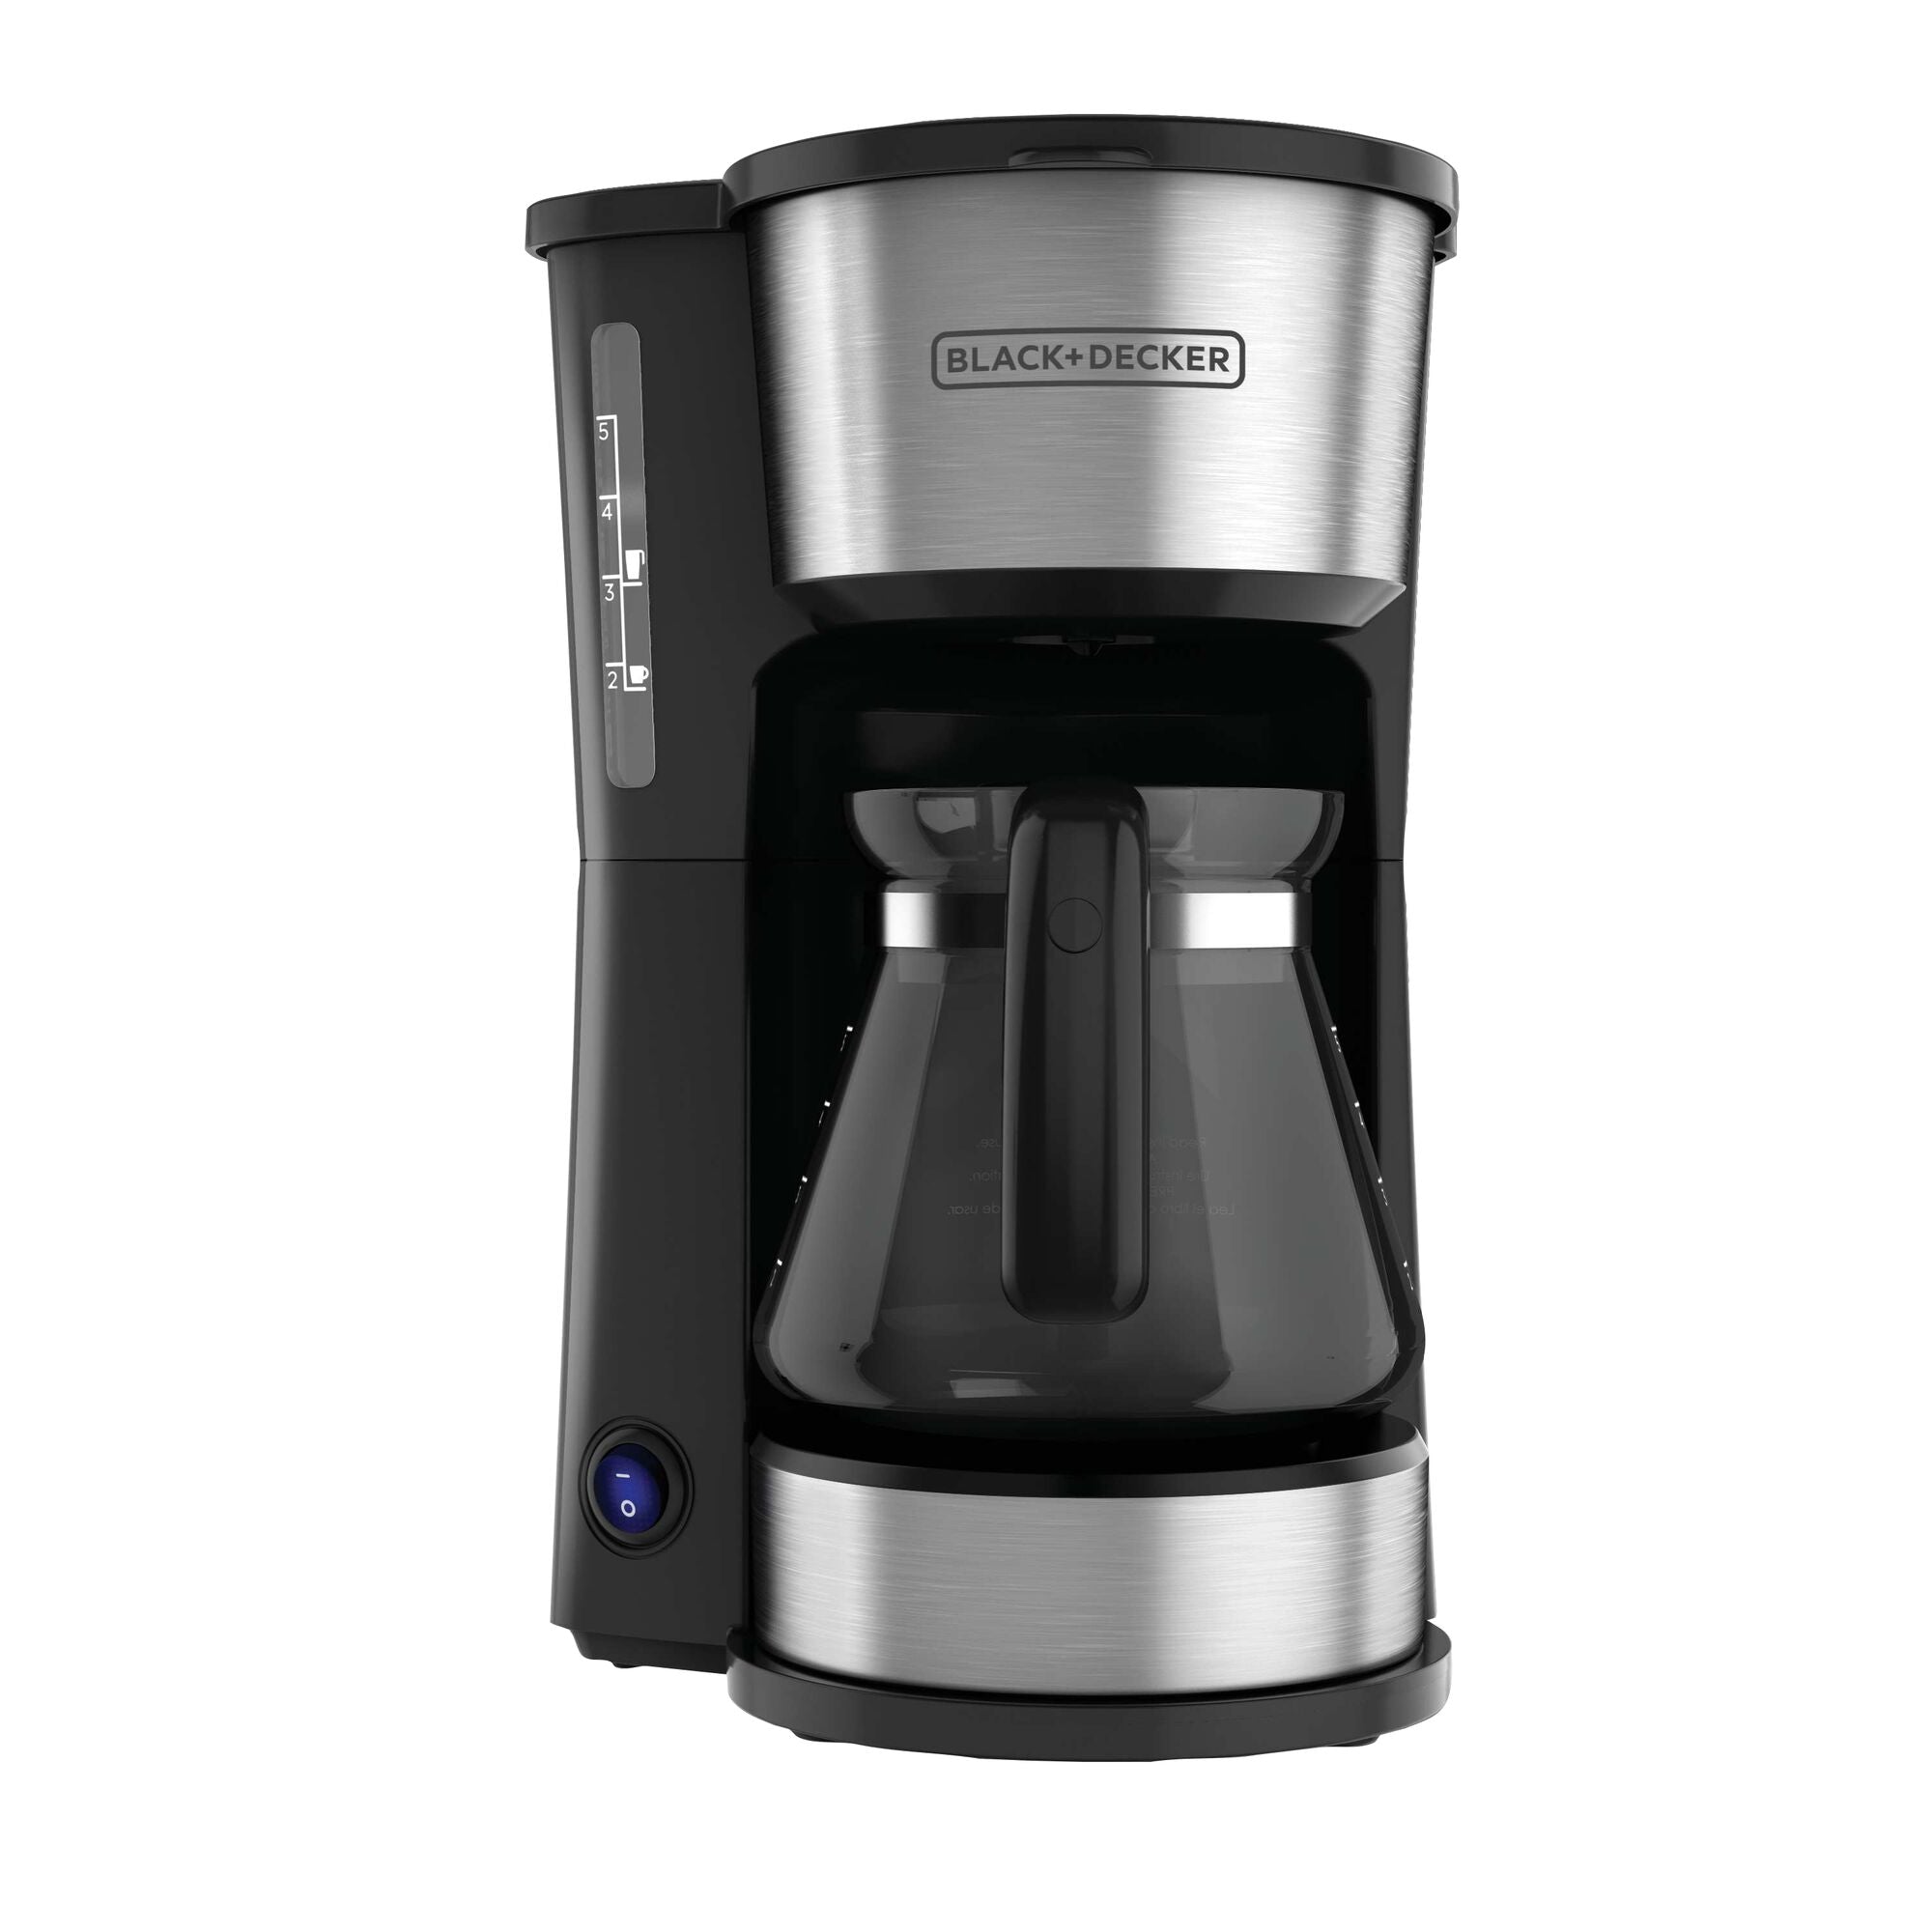 Black & Decker 5 Cup Coffee Maker Station 4 in 1 DETAILED REVIEW & How To 